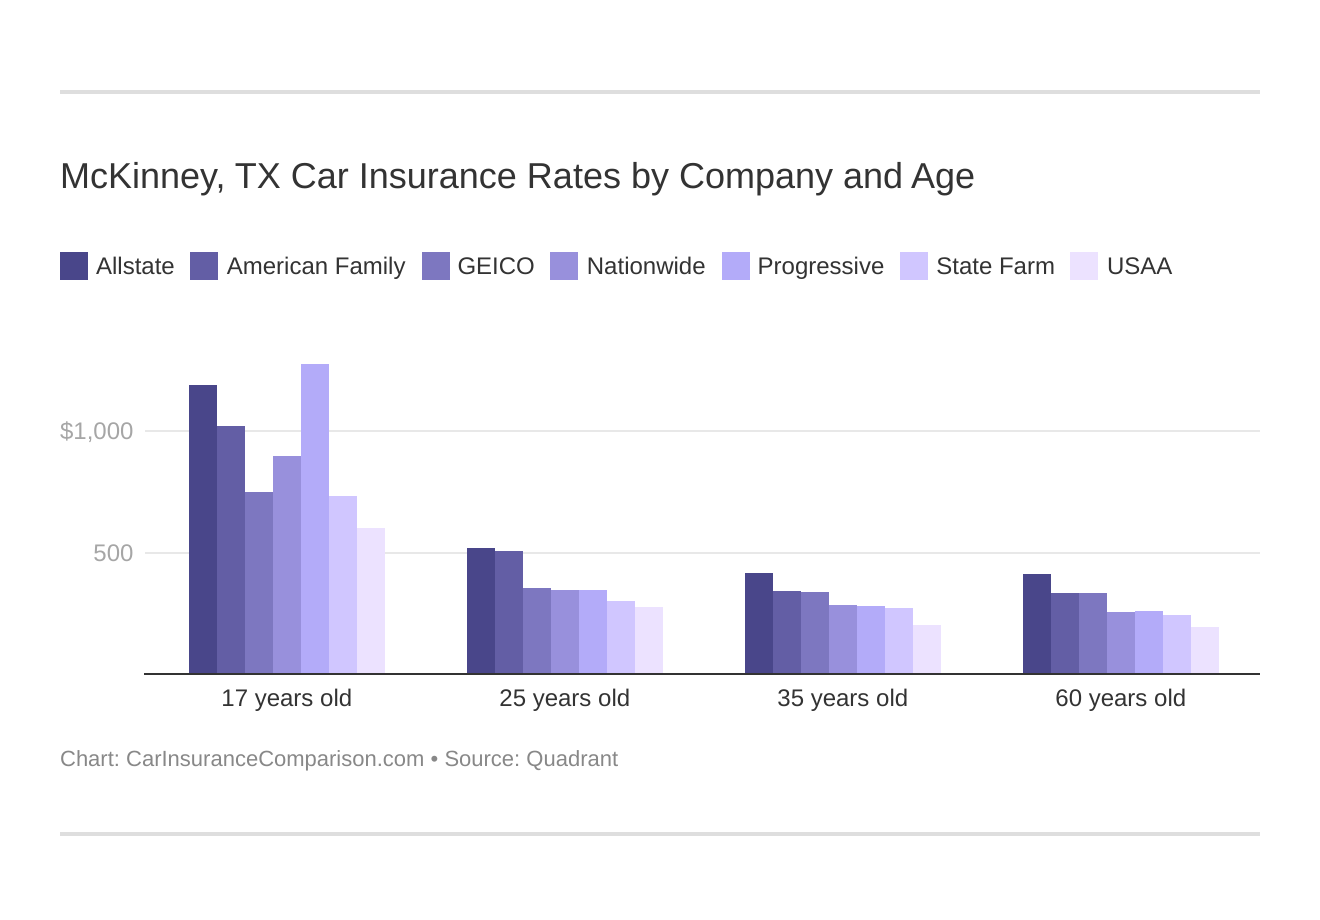 McKinney, TX Car Insurance Rates by Company and Age